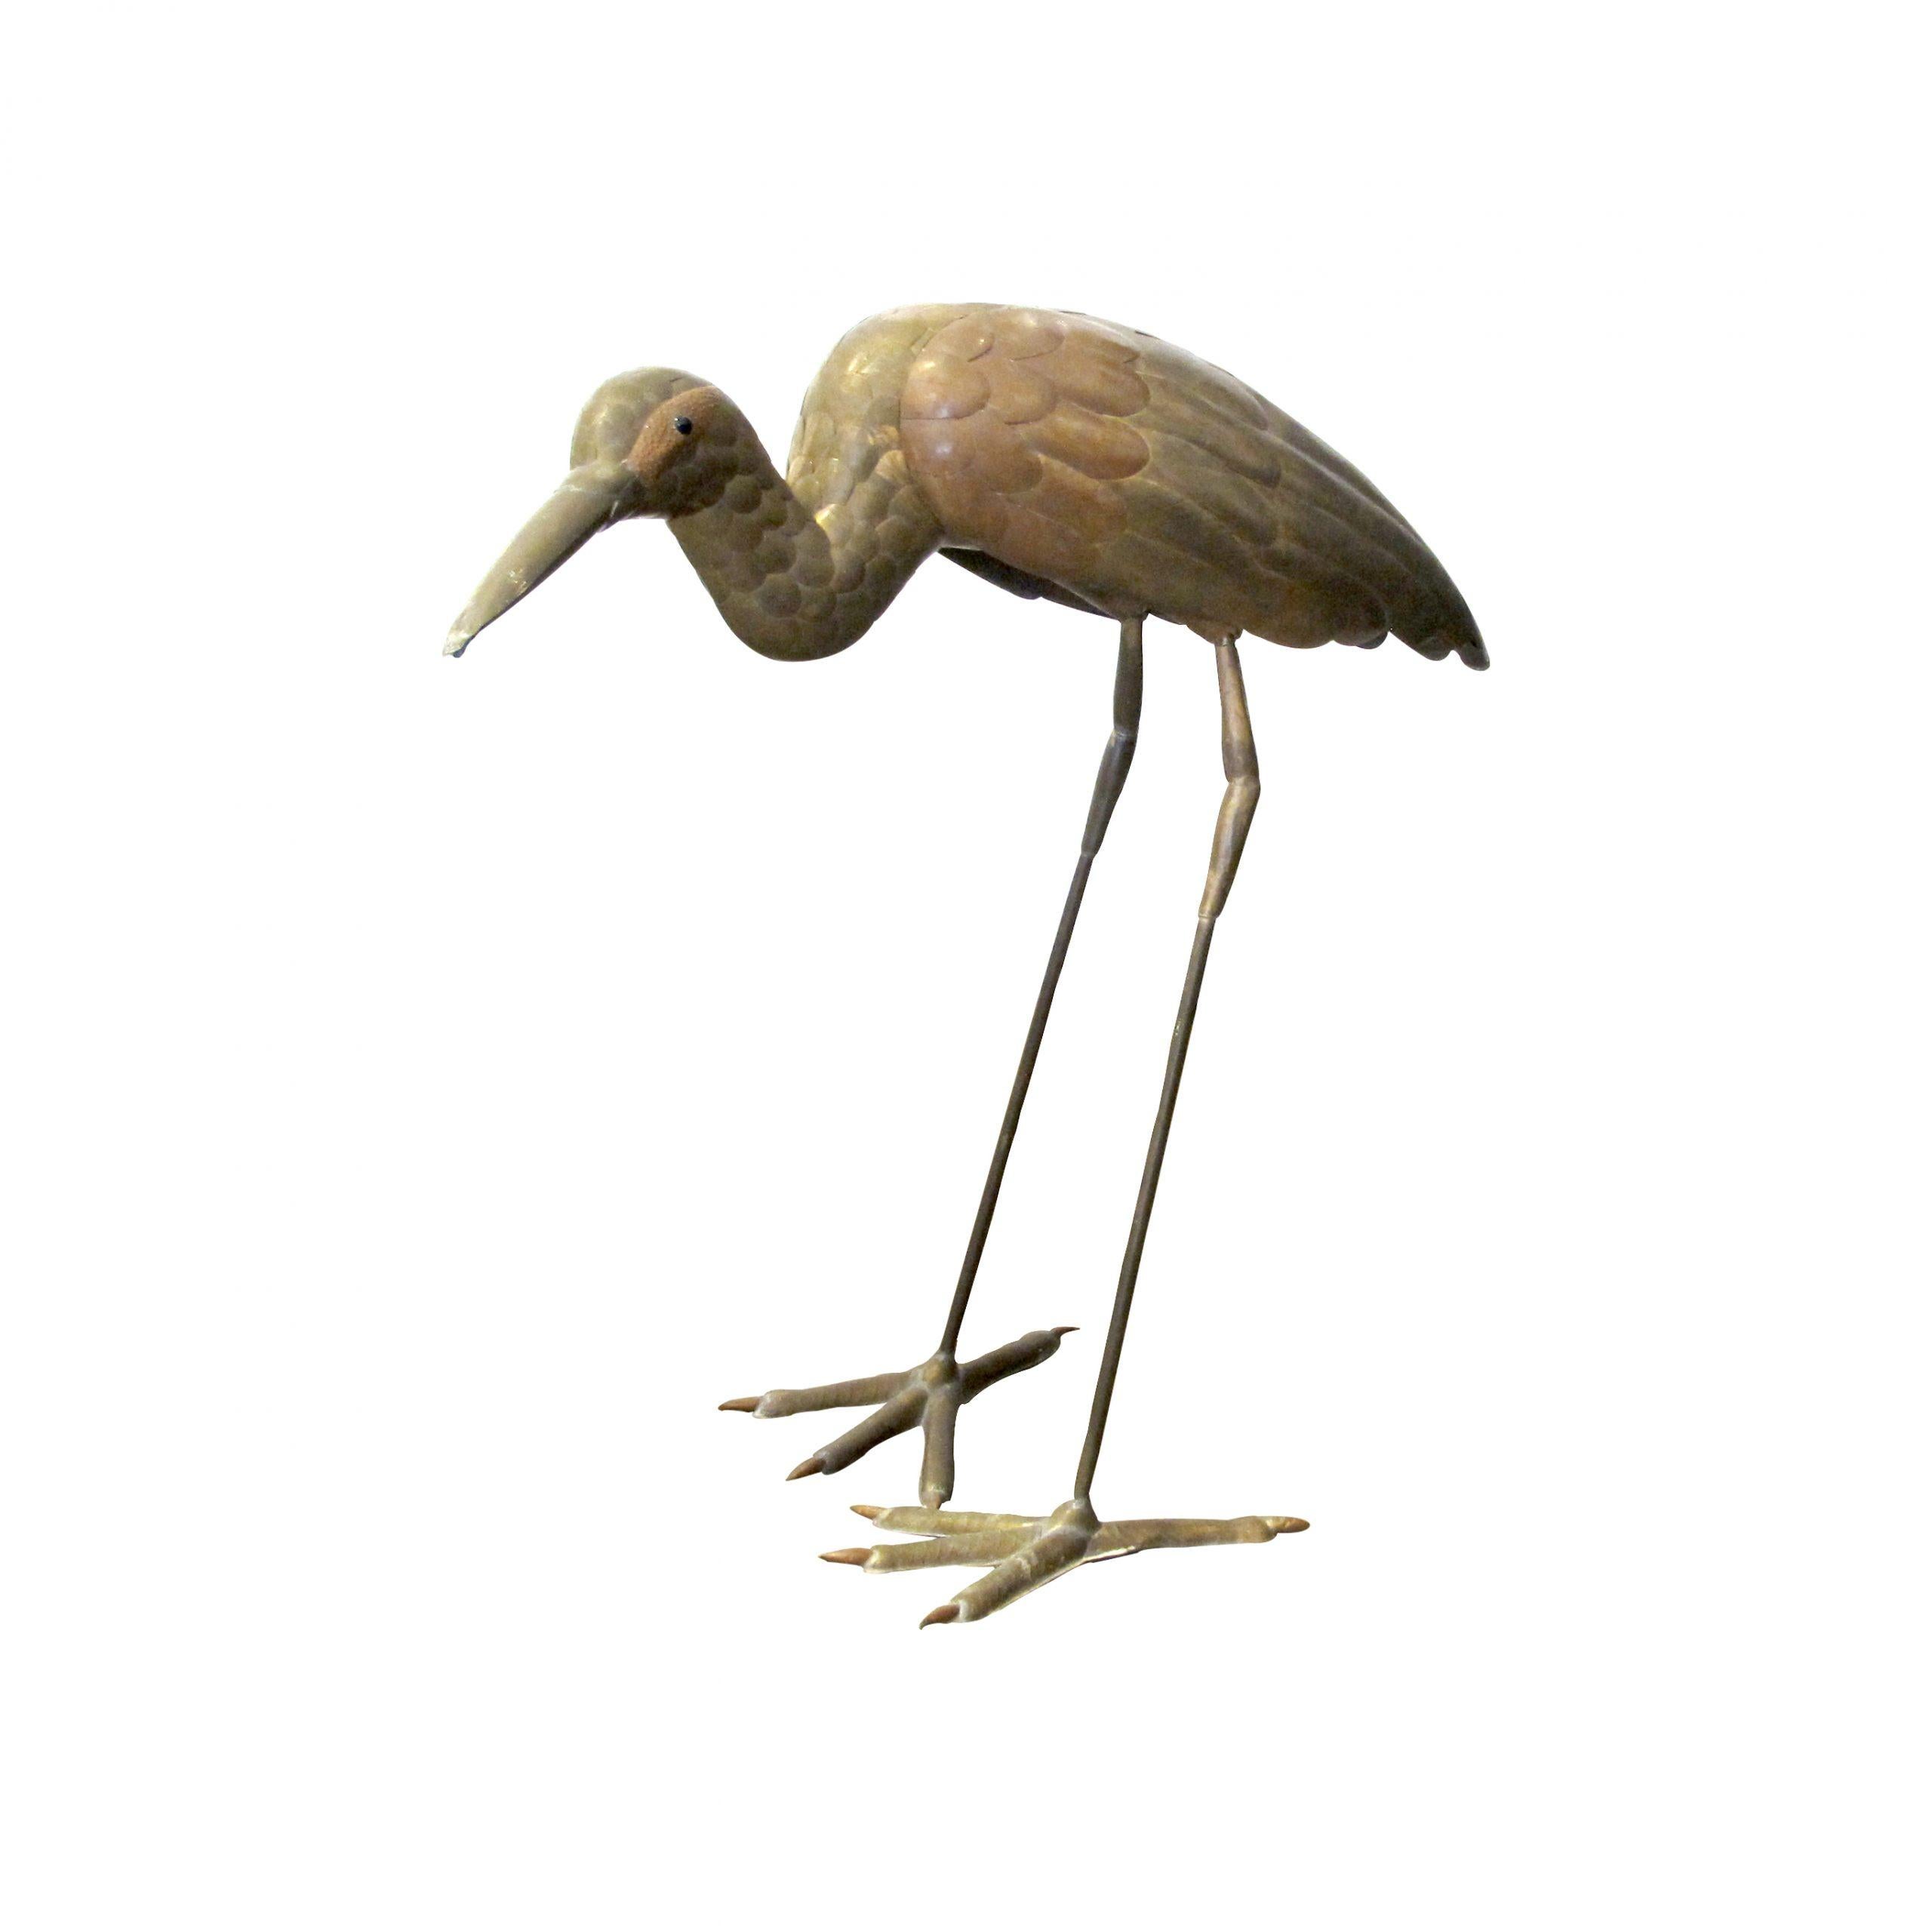 A tall free-standing life-size brass and copper sculpture of a heron by Mexican artist Sergio Bustamante, 1970’s. 
Size: H65 cm x W70 cm x D30 cm

Artist biography:
Bustamante's first art exhibition showcased paintings and papier-mâché figures at